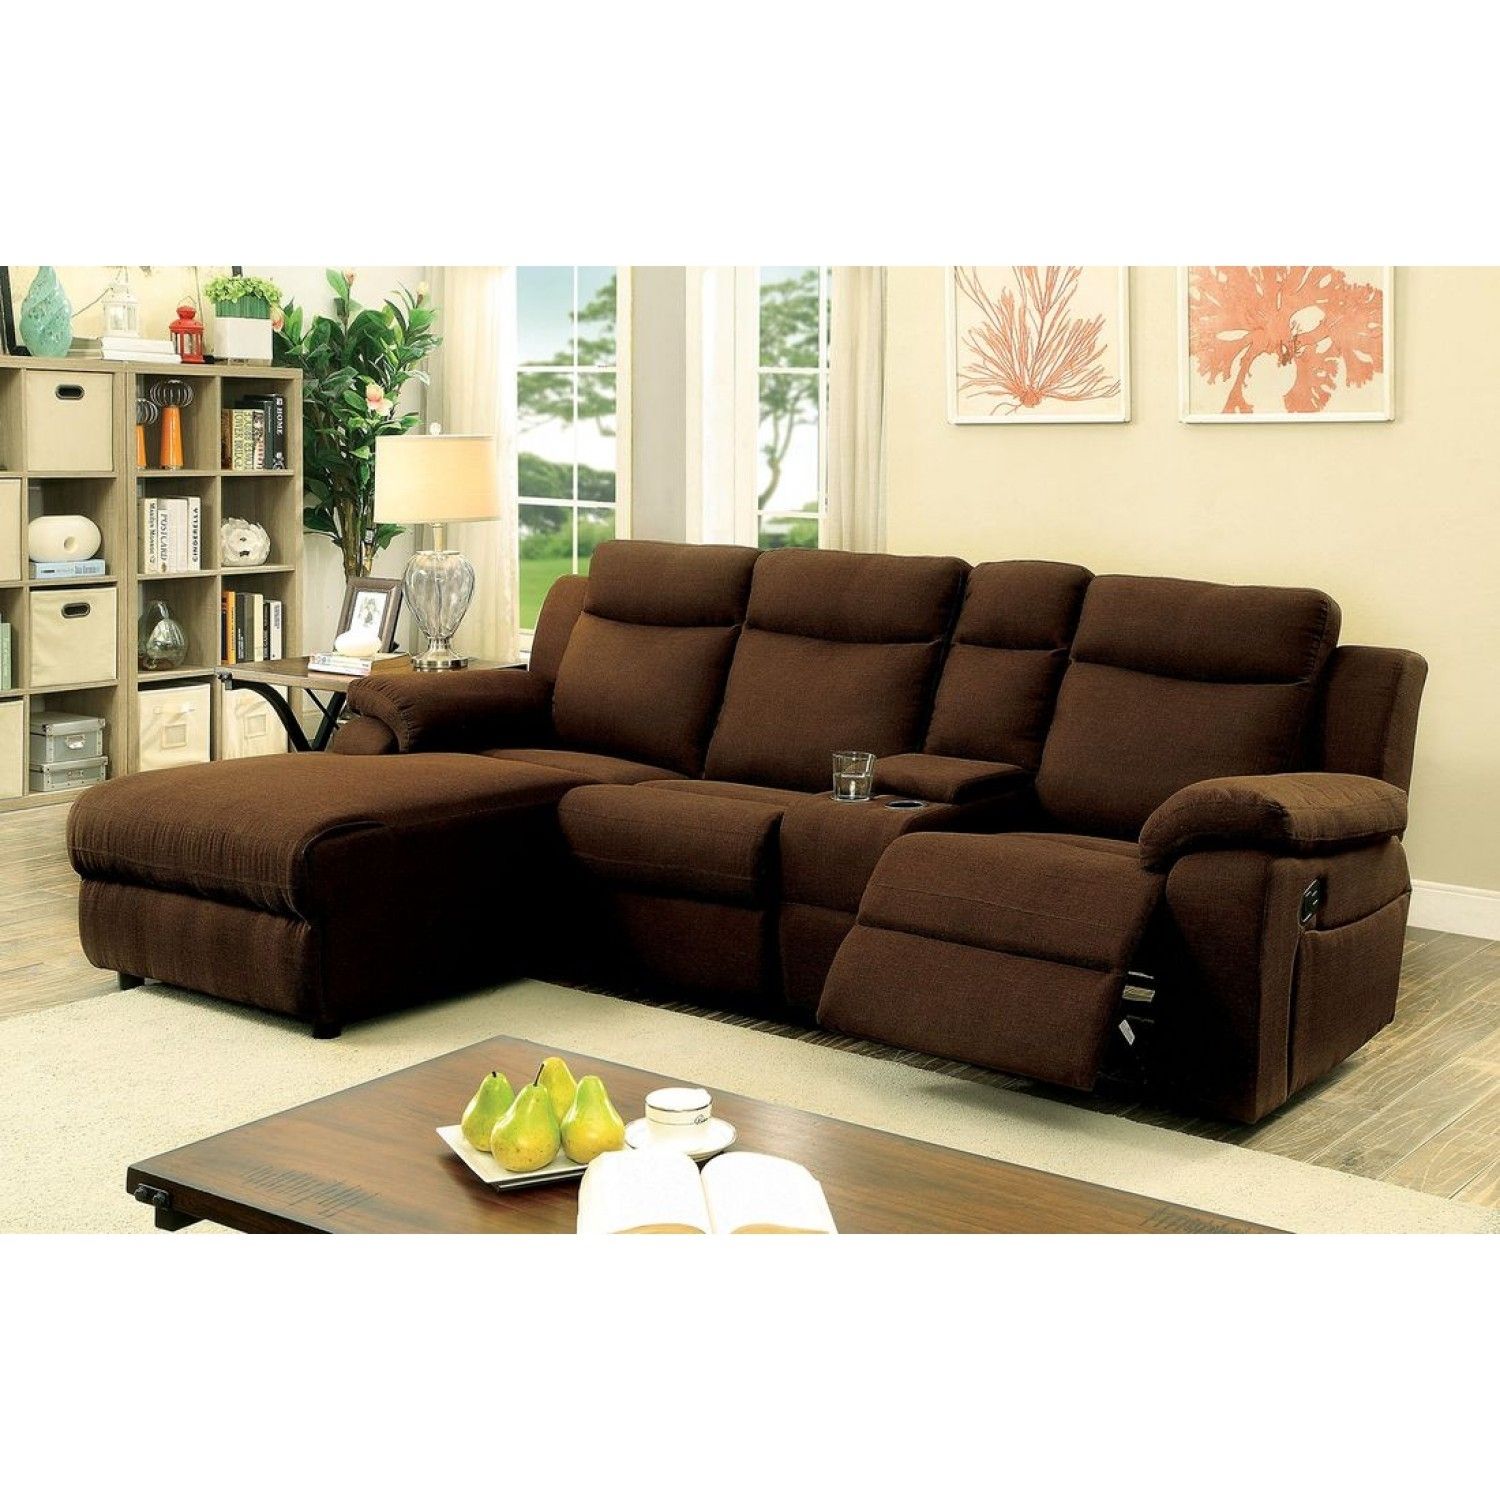 Furniture: Harbor Freight Furniture | Sectional Sofas Under 300 With Regard To Pittsburgh Sectional Sofas (View 6 of 10)